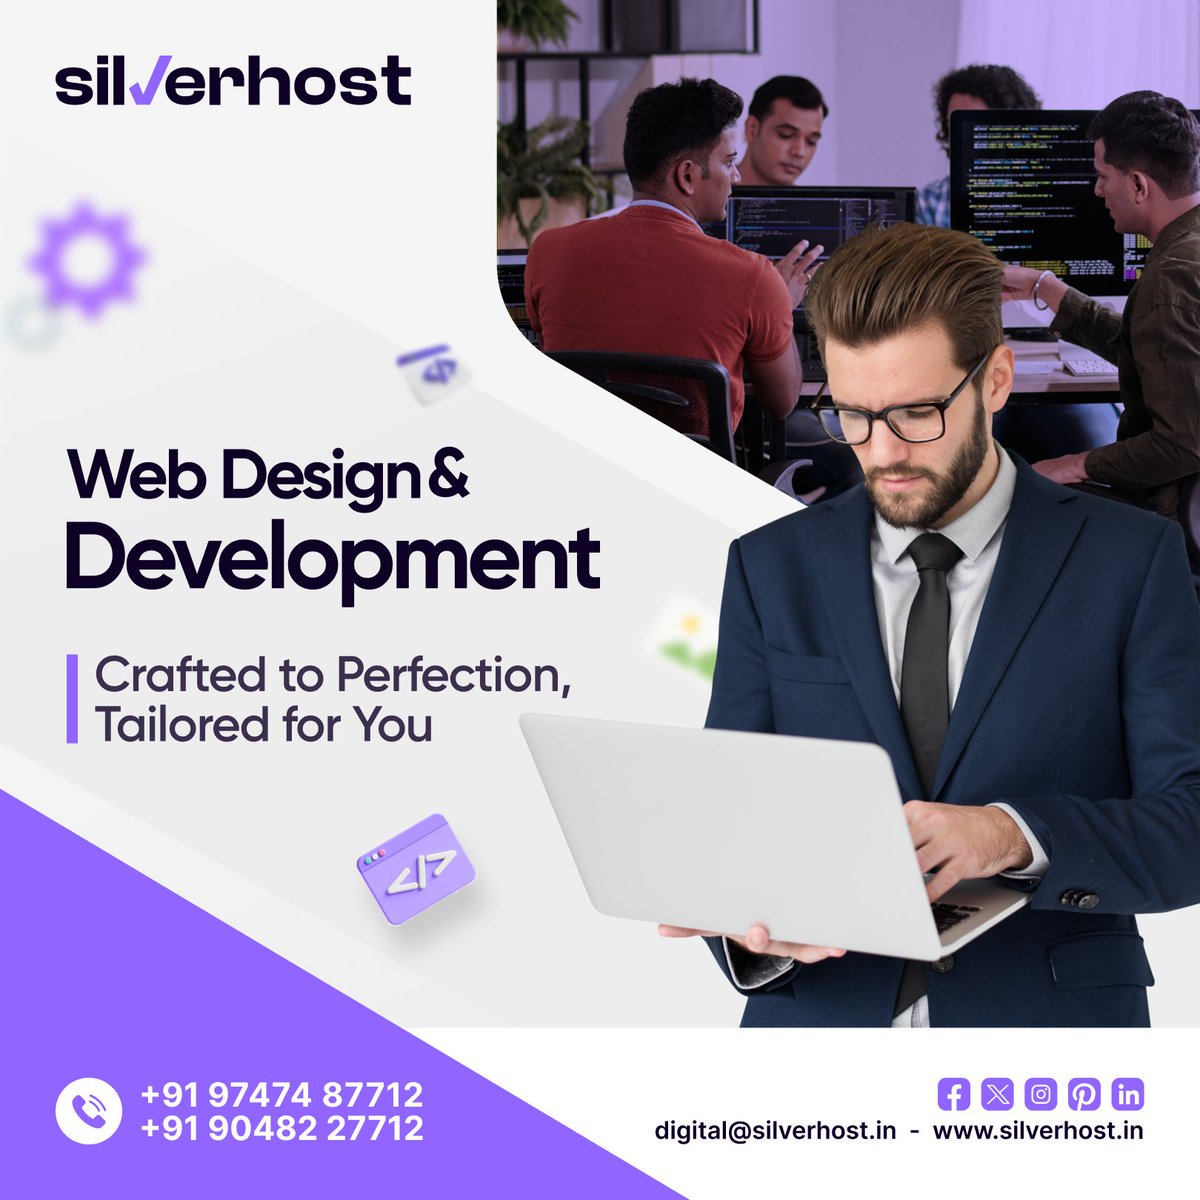 Elevate Your Online Presence with Web Design and Development Crafted to Perfection at SilverHost! 🚀💻

📱: +91 90482 27712, +91 9747487712
📧: info@silverhost.in

 #ResponsiveWebsites #CustomWebDesign #SilverHost #WebDevelopment #ECommerceWebsite #Pattambi #shornur #kerala #uae